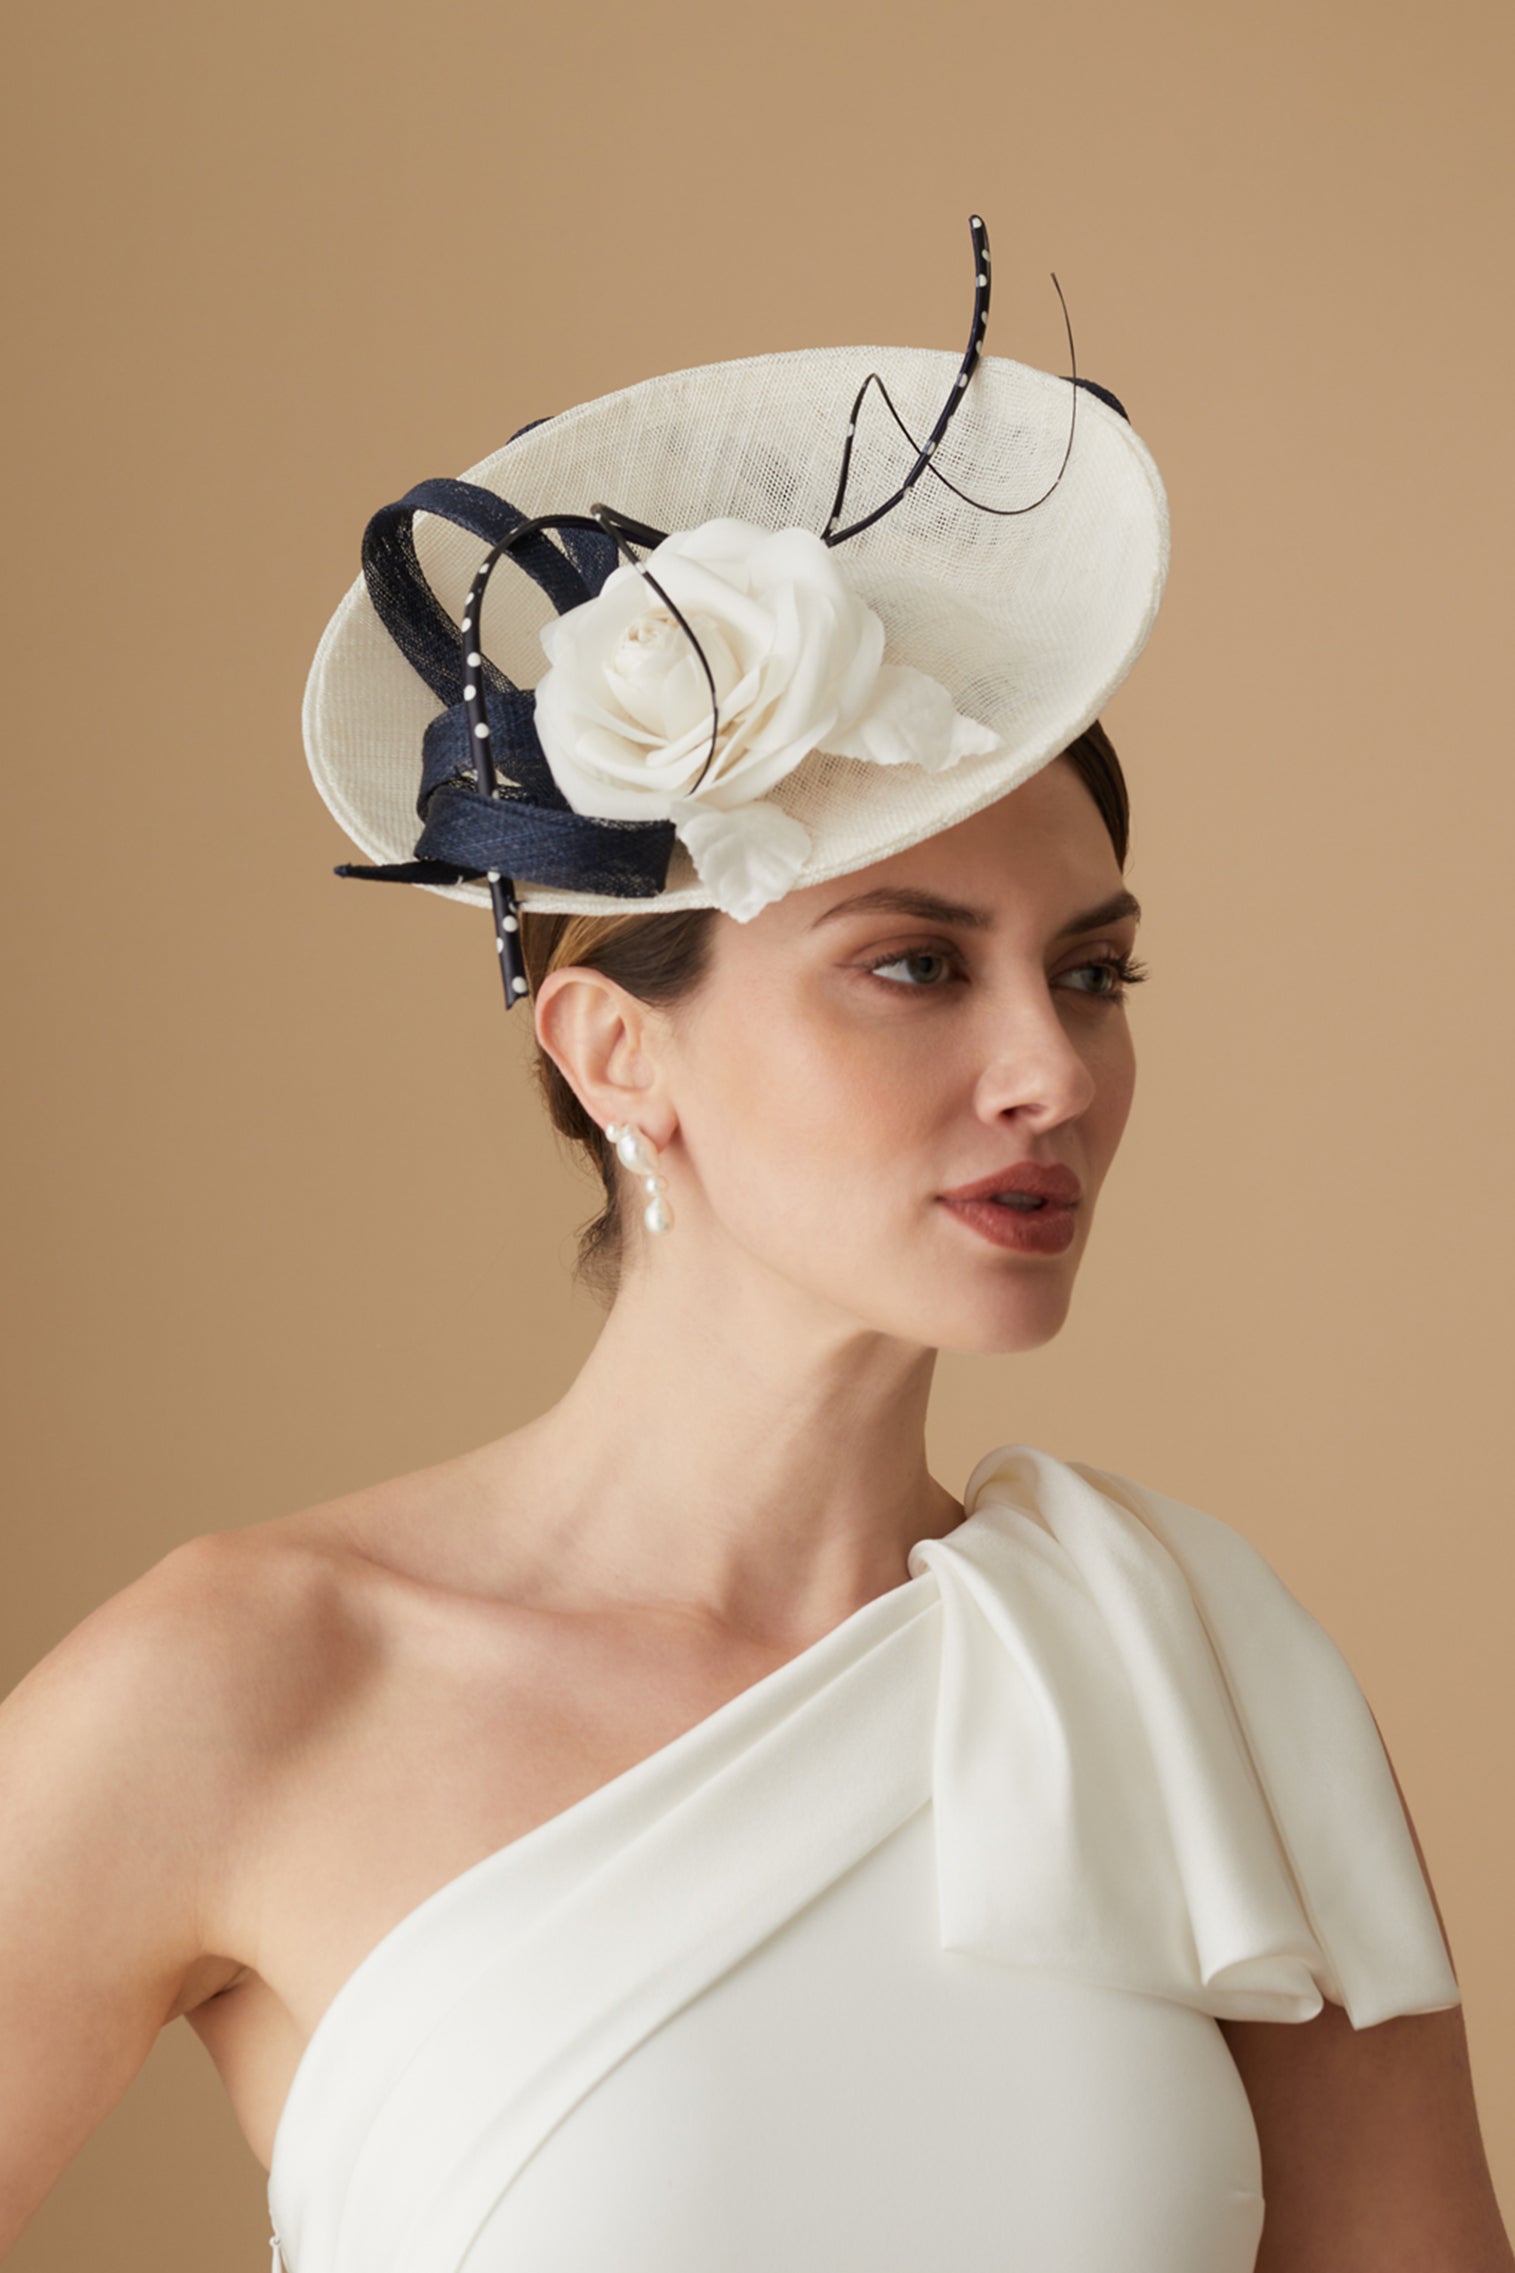 Assam White and Navy Saucer Hat - Royal Ascot Hats - Lock & Co. Hatters London UK